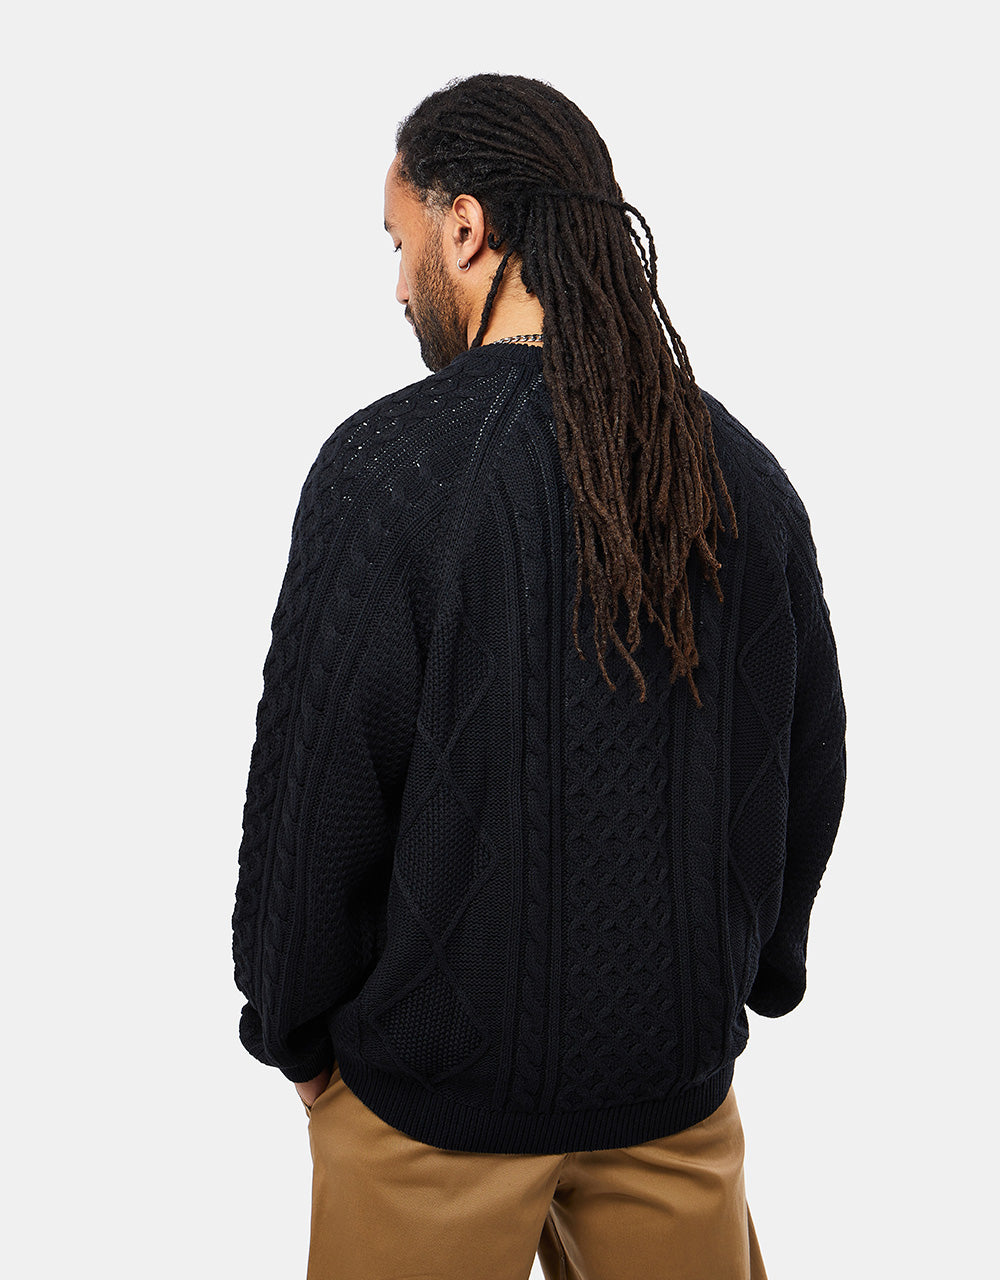 Nike Cable Knit Sweater - Black